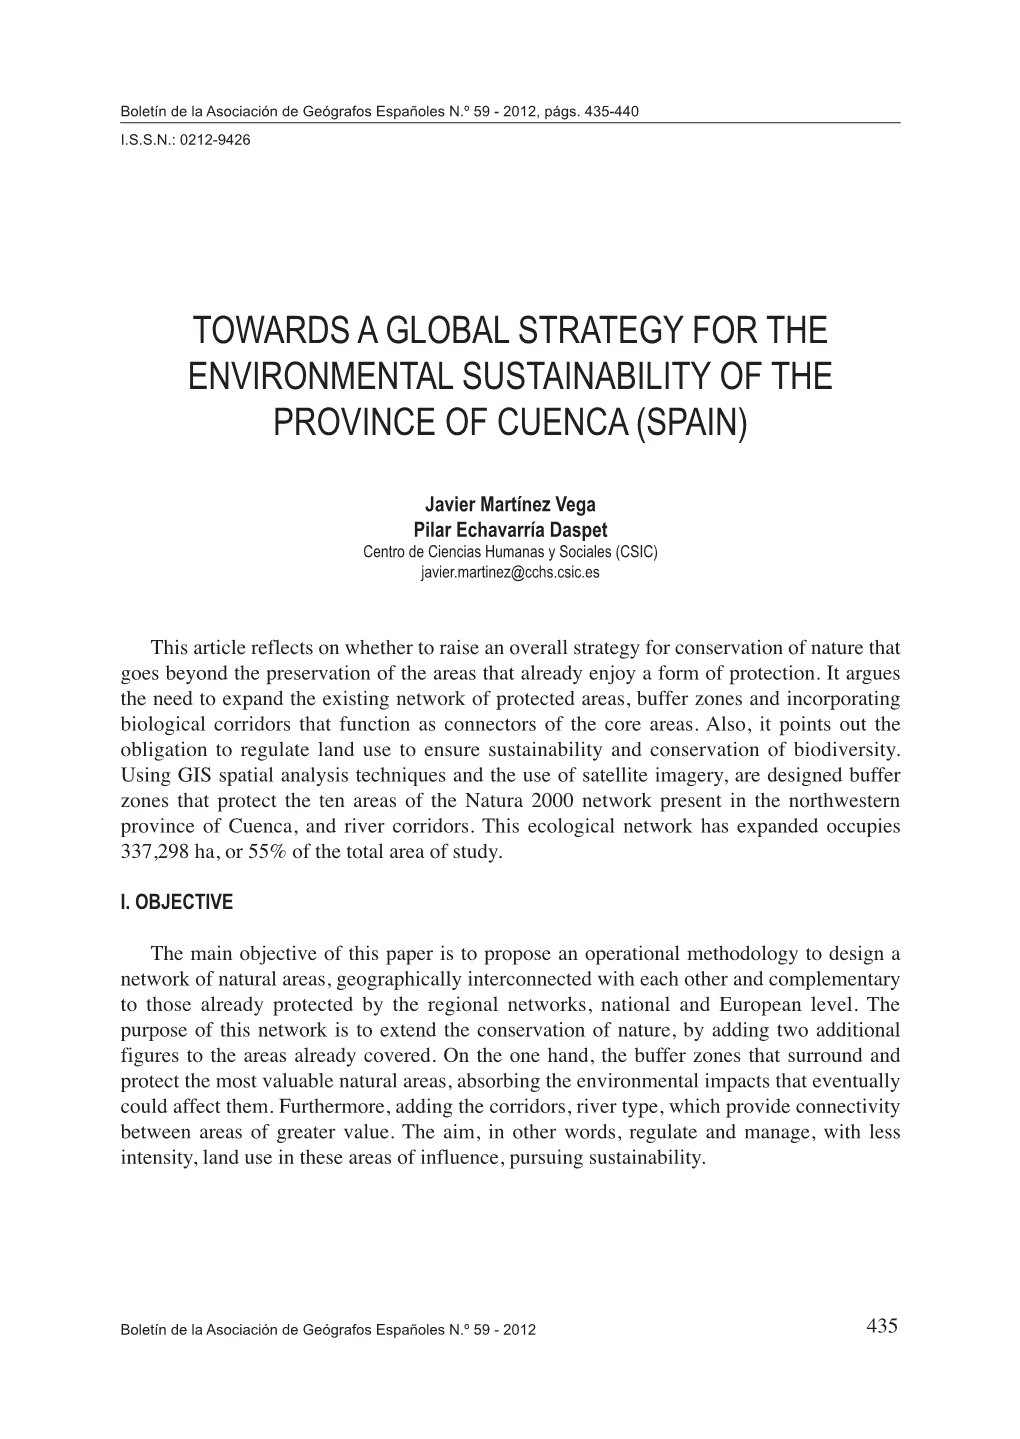 Towards a Global Strategy for the Environmental Sustainability of the Province of Cuenca (Spain)